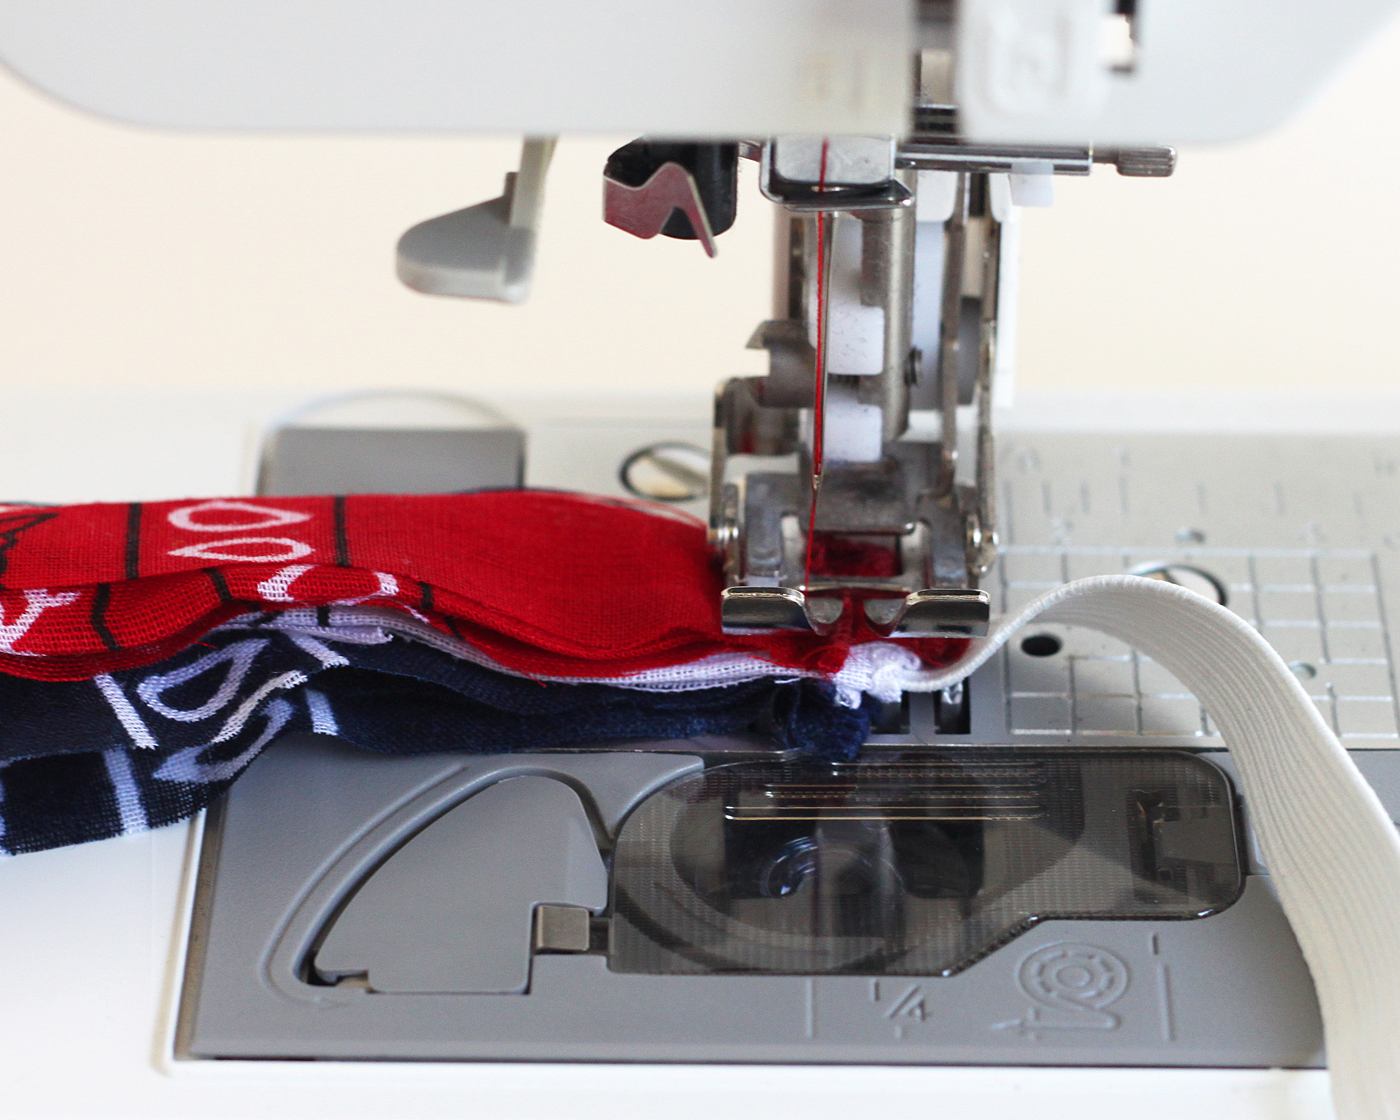 Sewing elastic into bandanas with a sewing machine